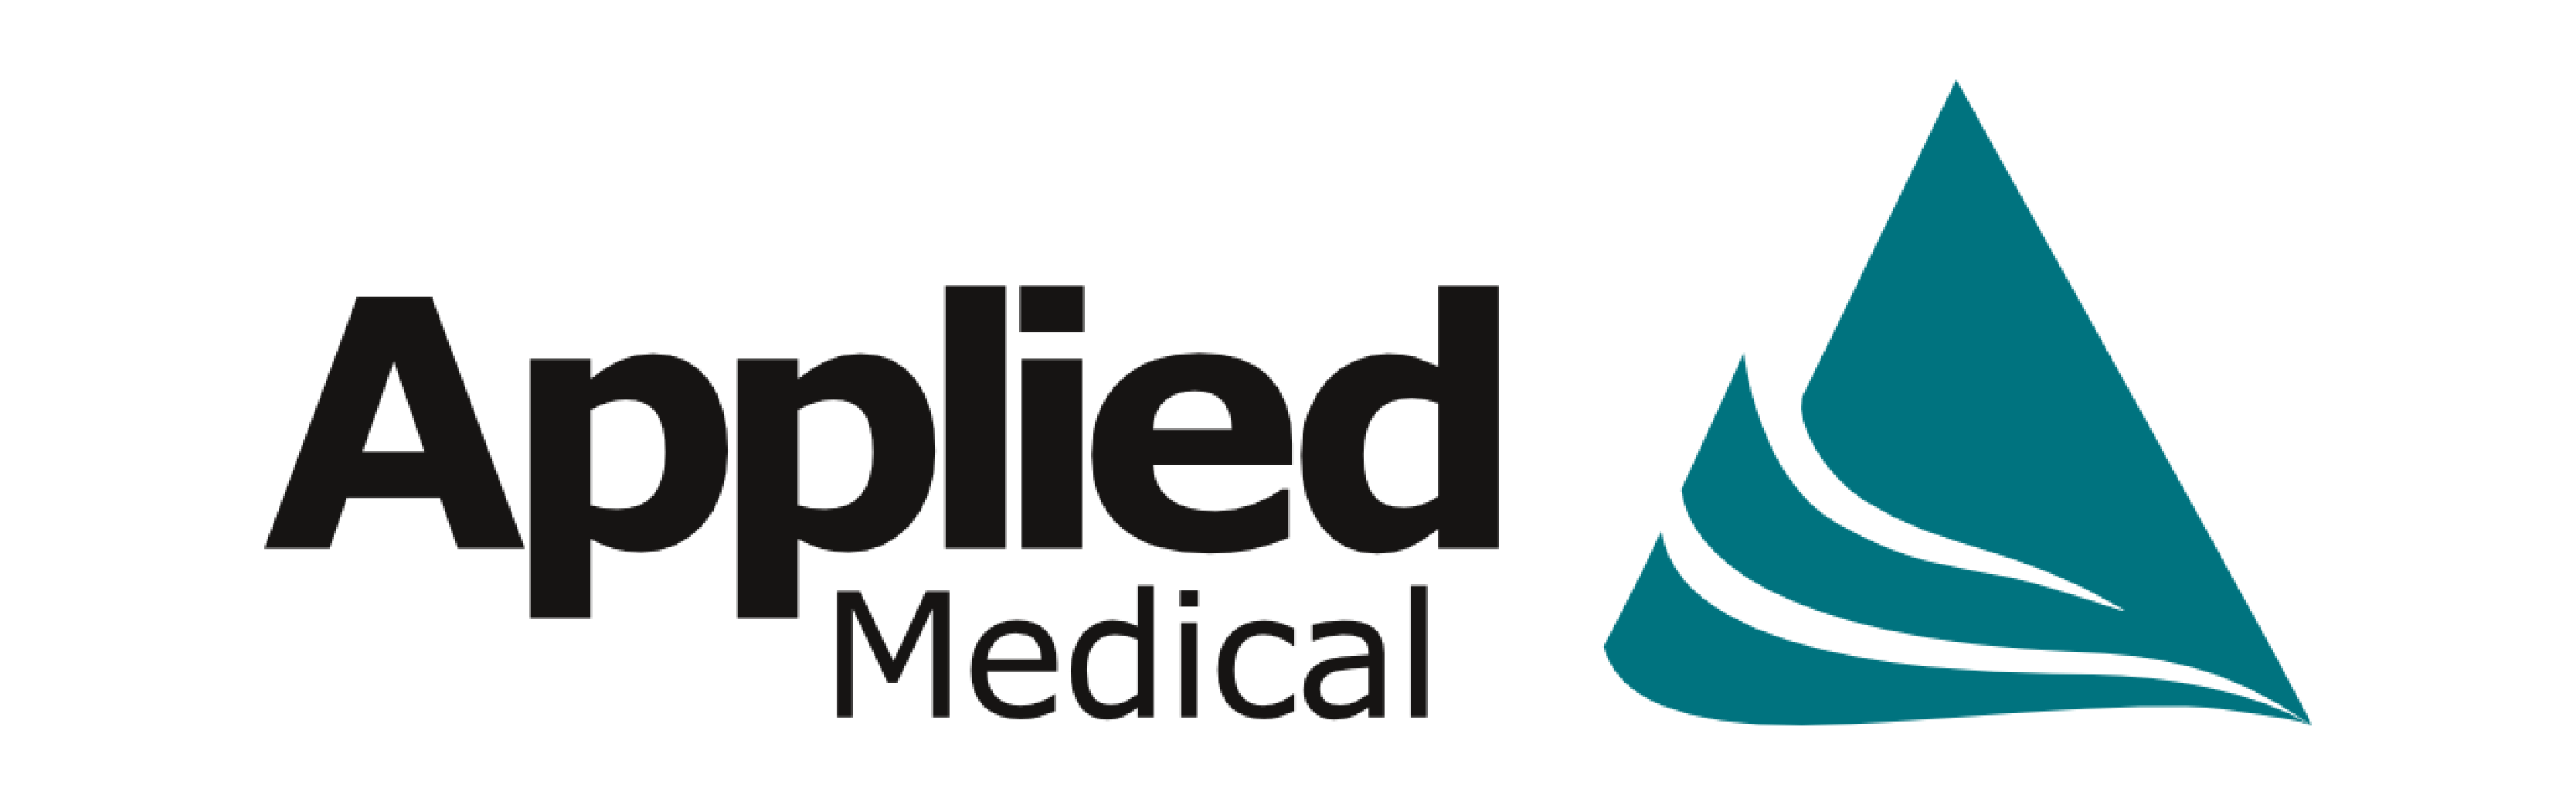 applied medical